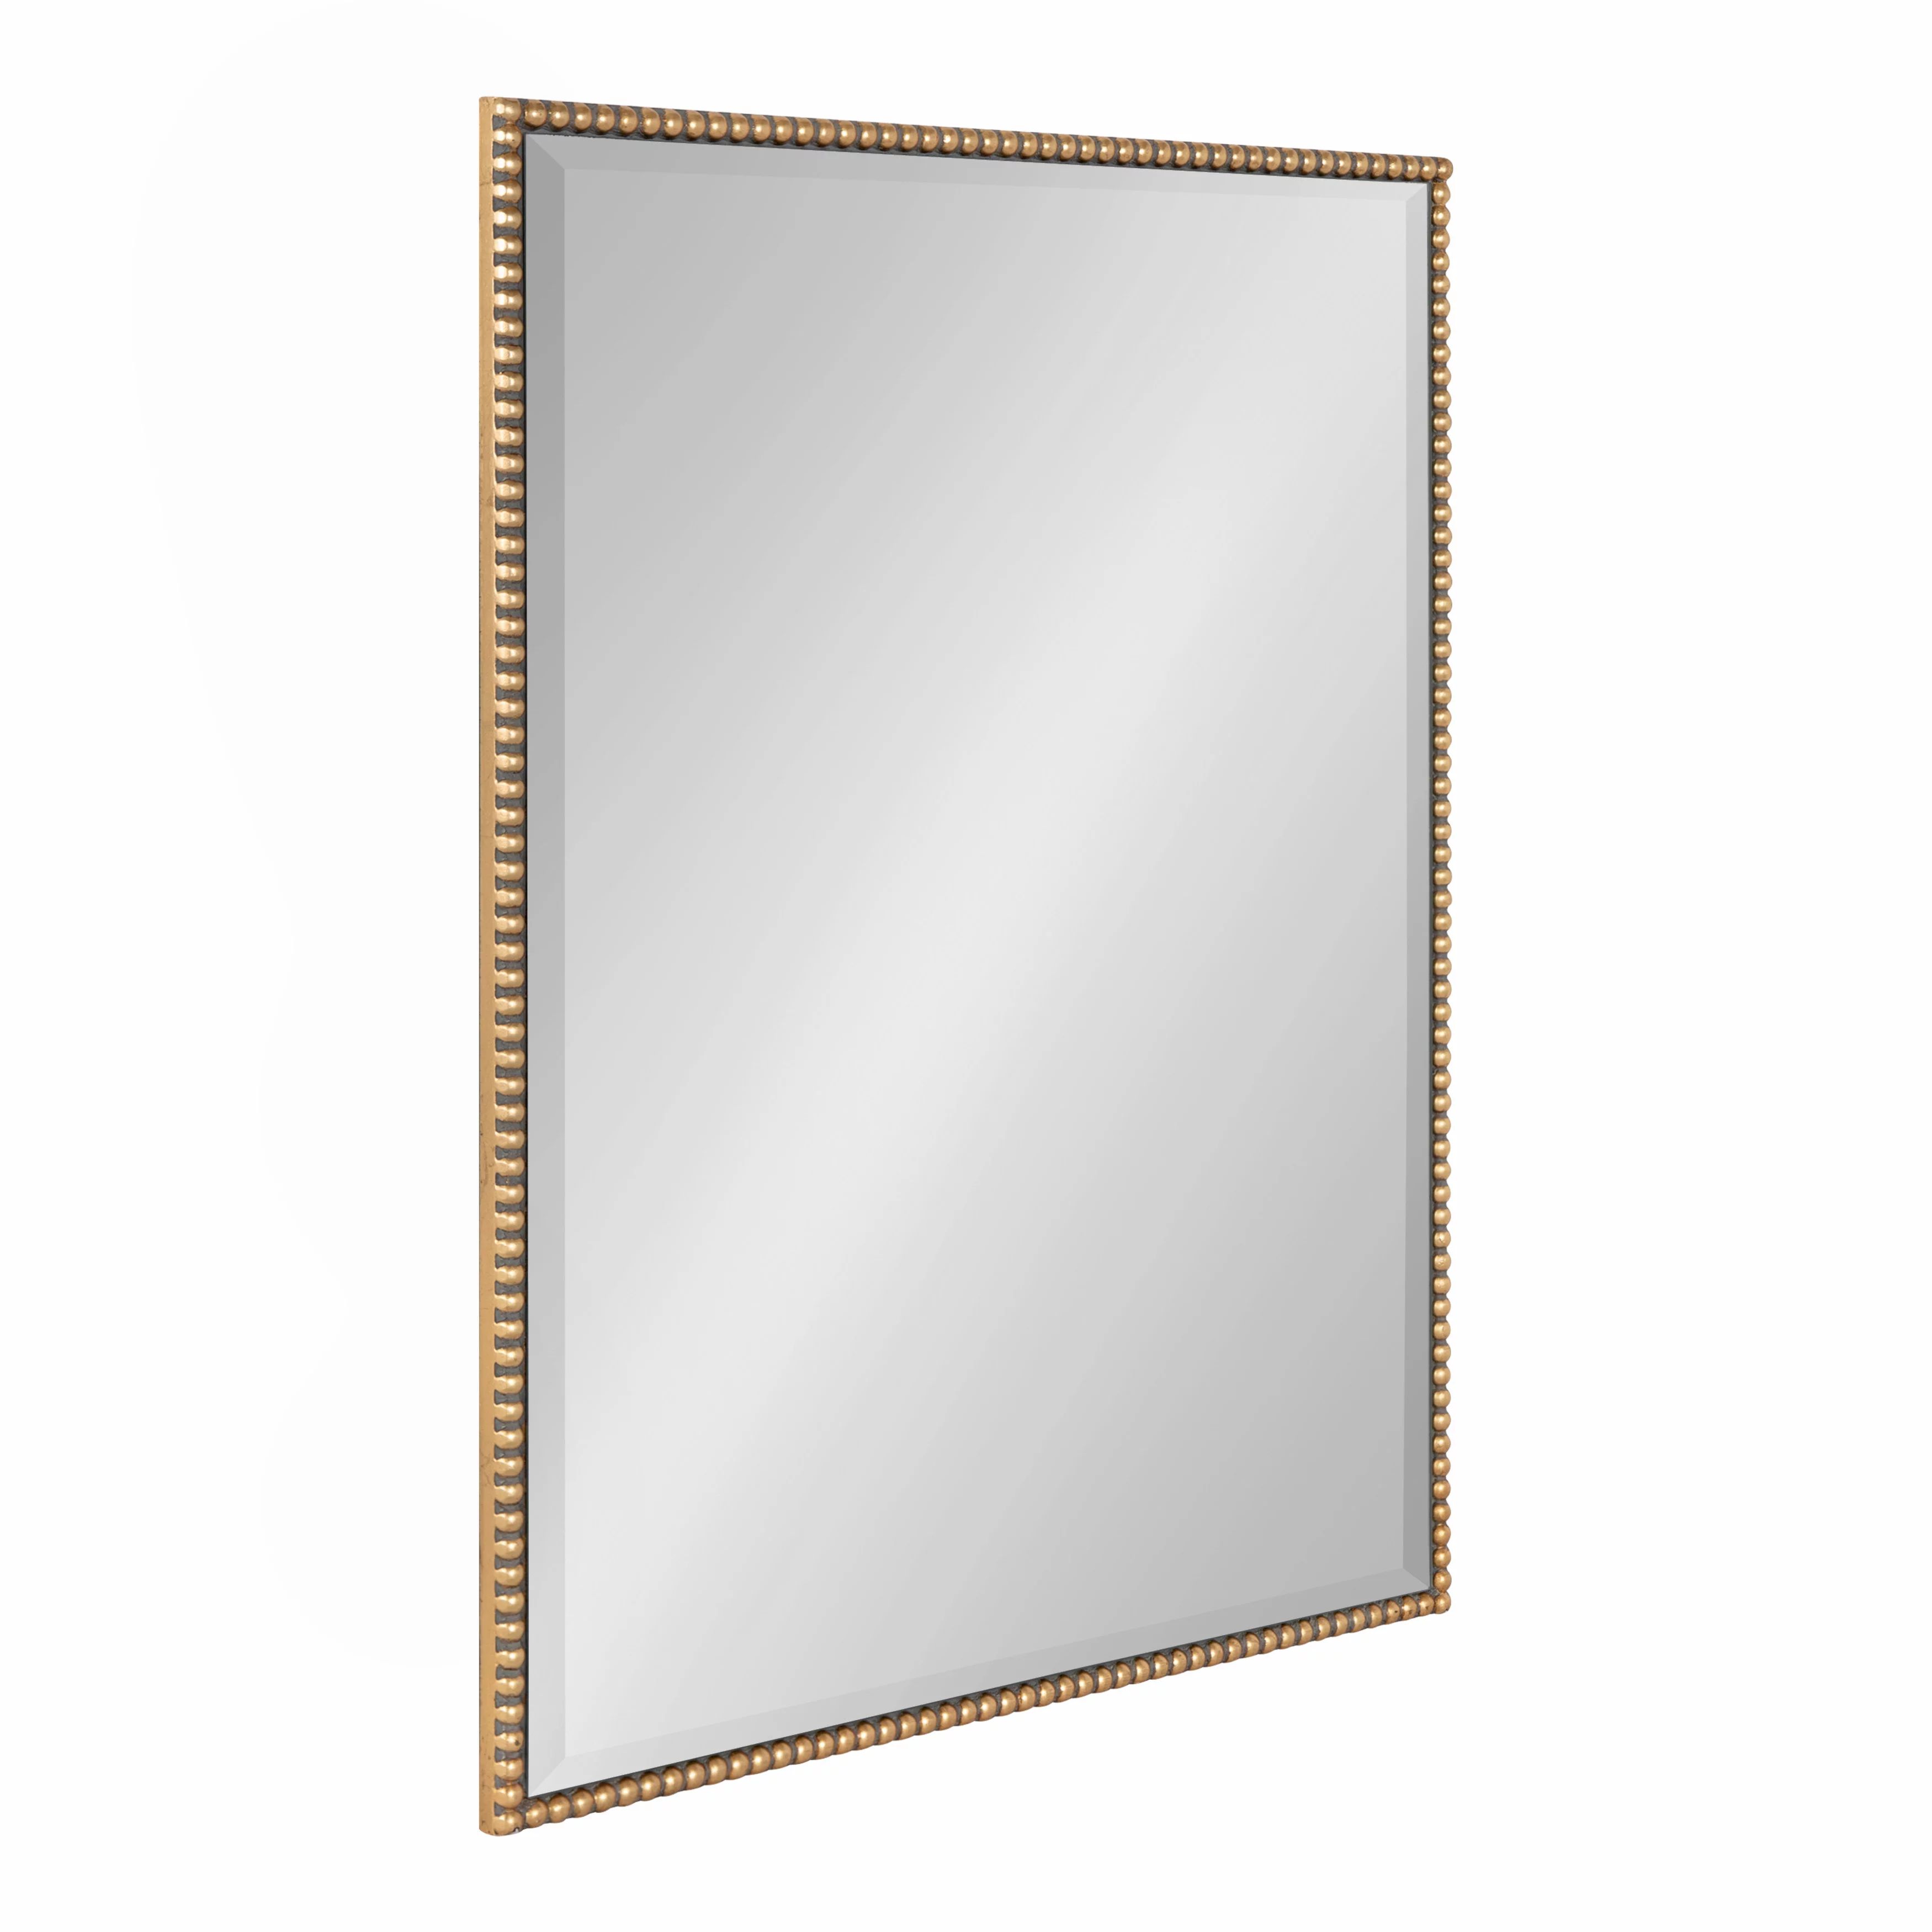 Kate and Laurel Gwendolyn Modern Glam Beaded Framed Rectangle Wall Mirror, 18" x 24", Gold, Chic ... | Walmart (US)